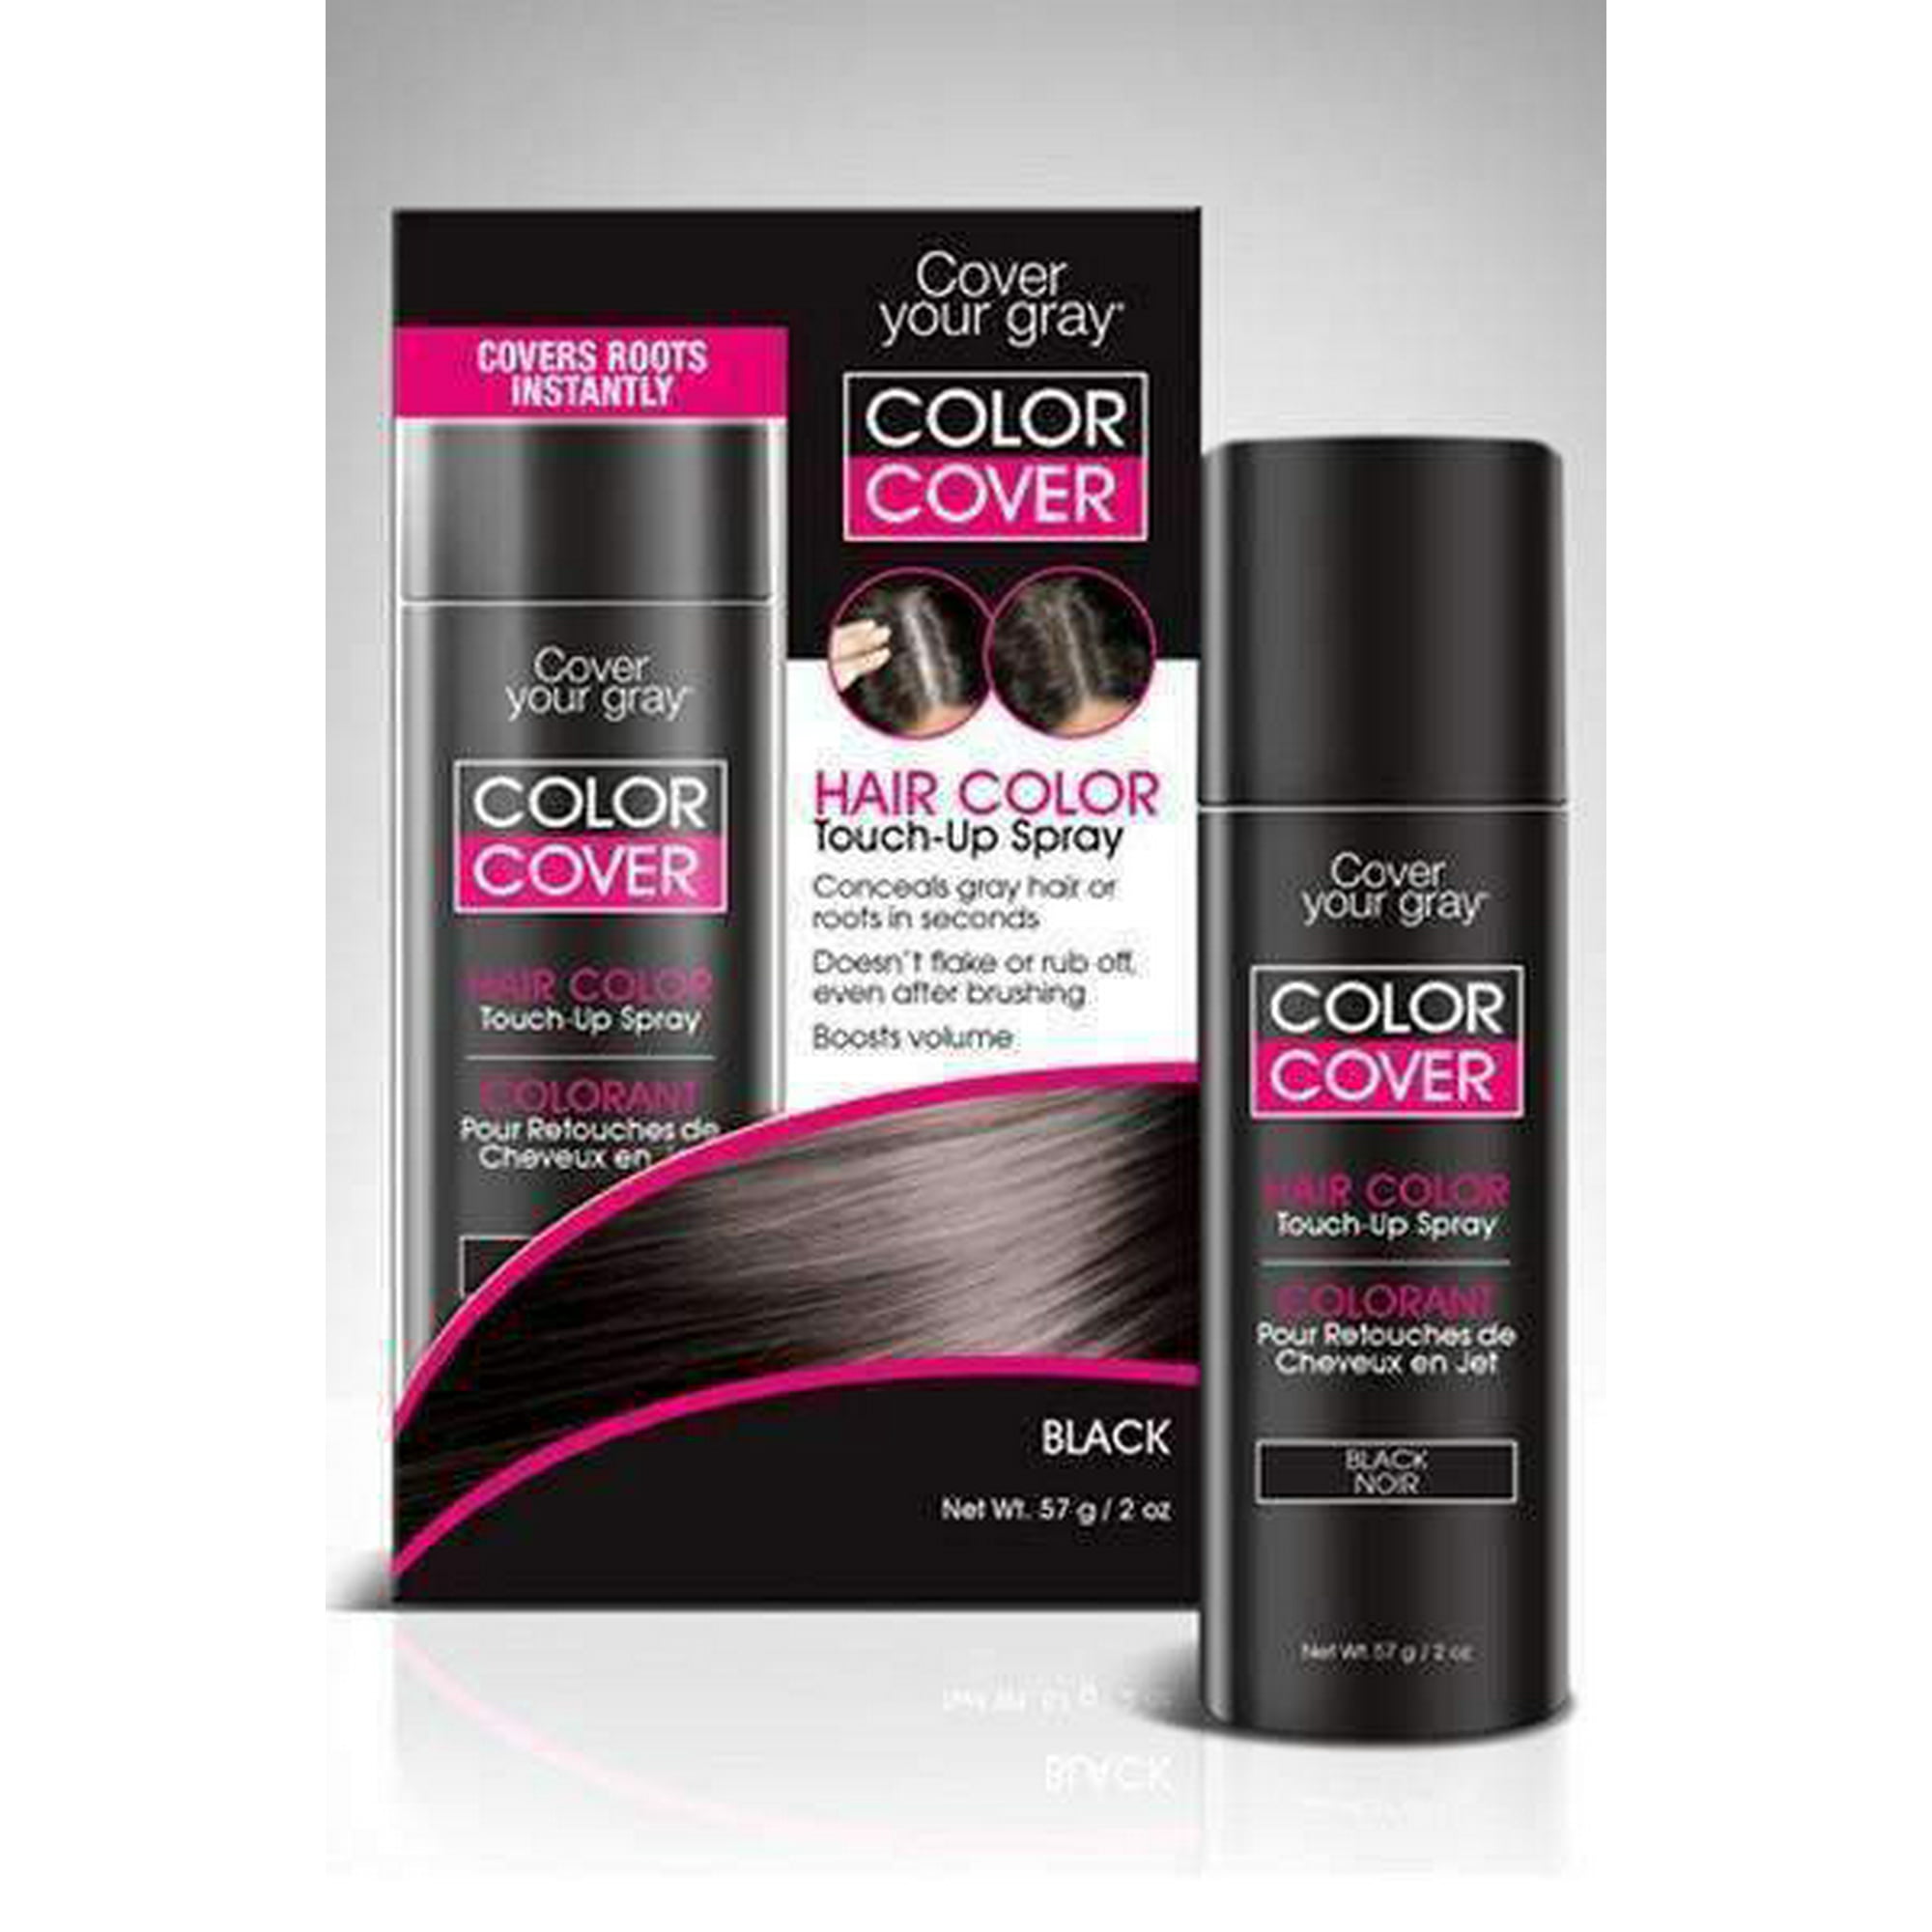 Cover Your Gray Hair Color Touch-up Spray - Black | Walmart Canada